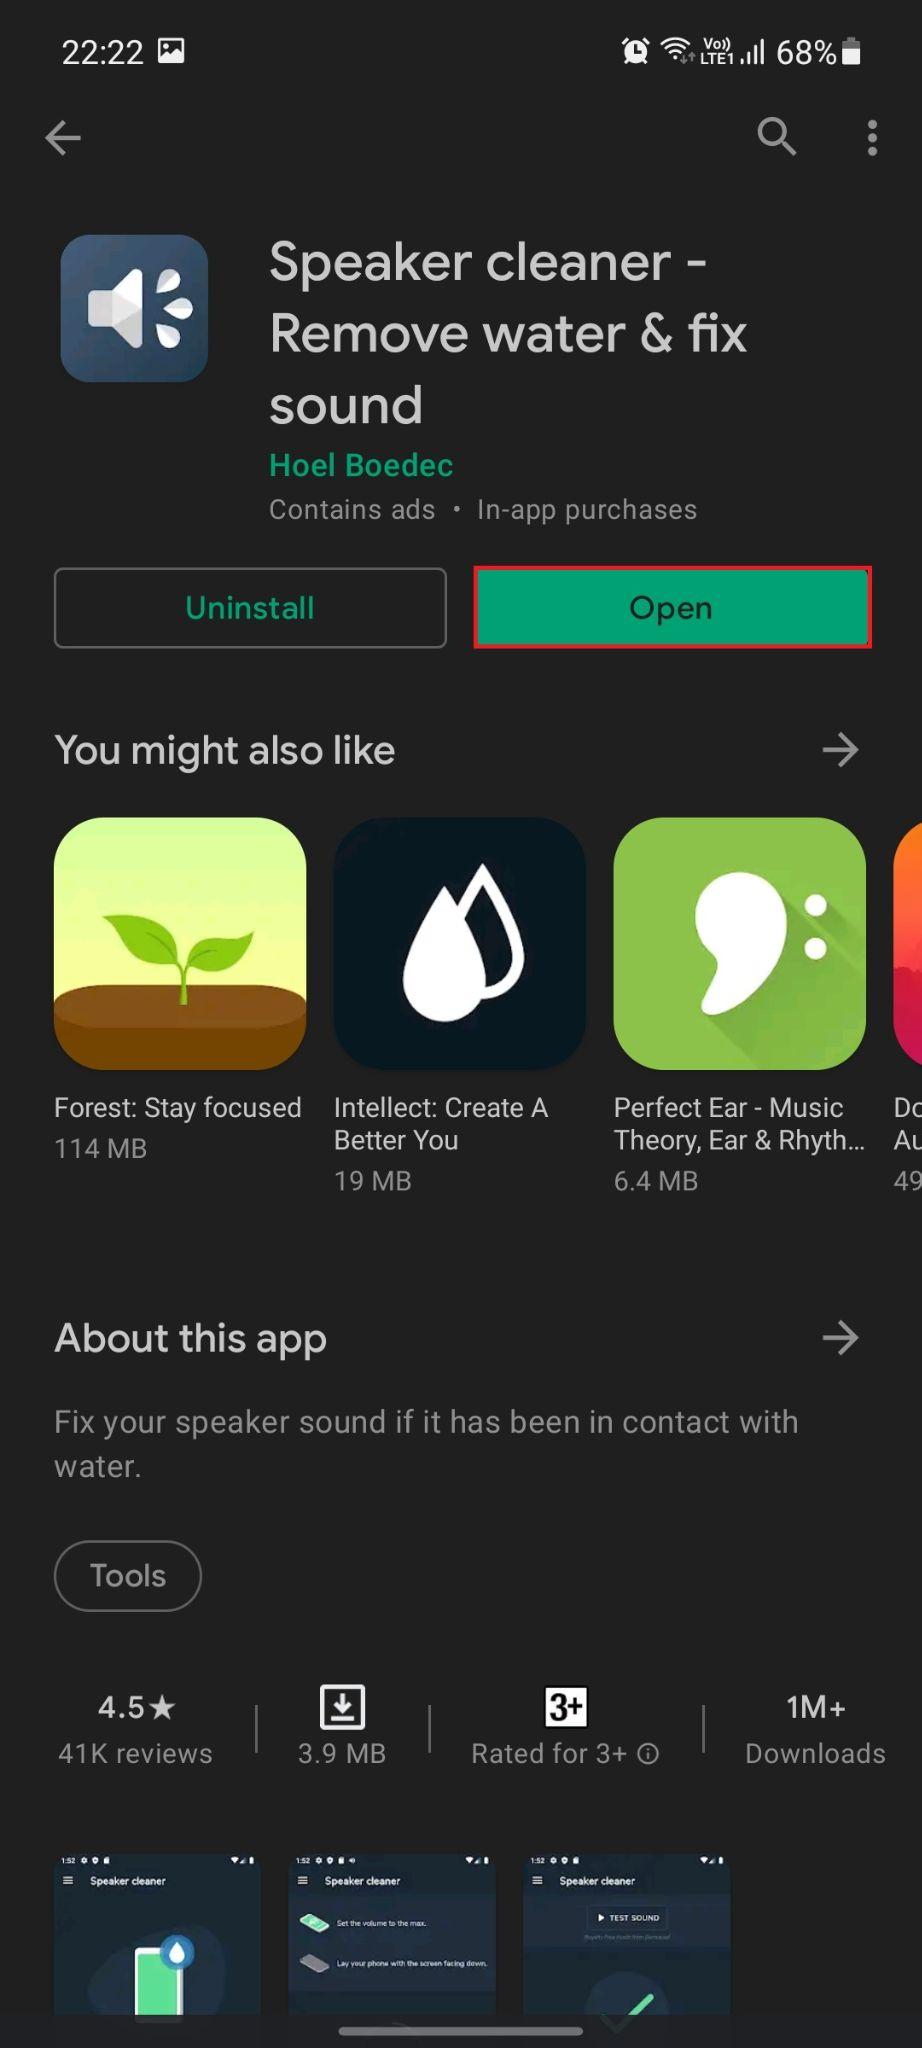 Speaker Cleaner - Remove water & fix sound app. Open option is highlighted.